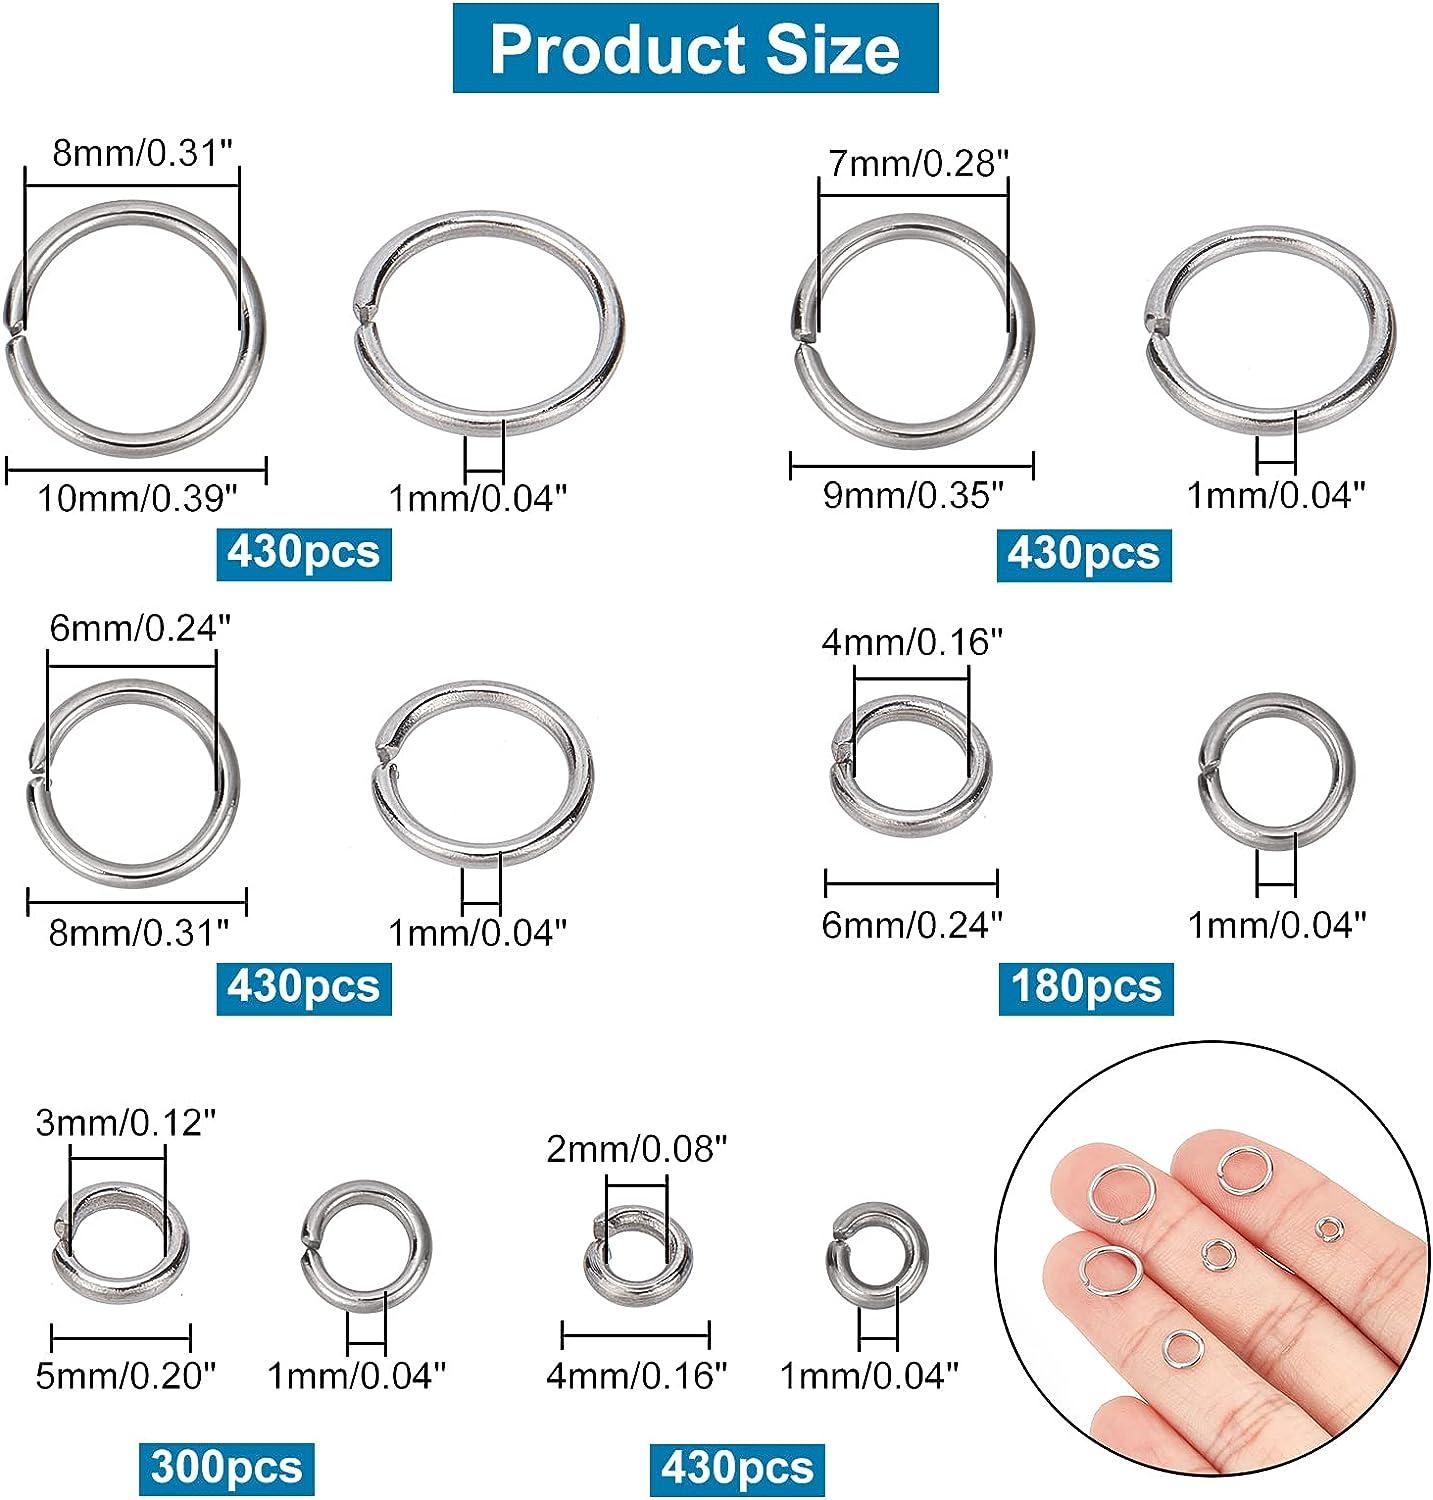 6mm Stainless Steel 18 gauge Open Jump Ring